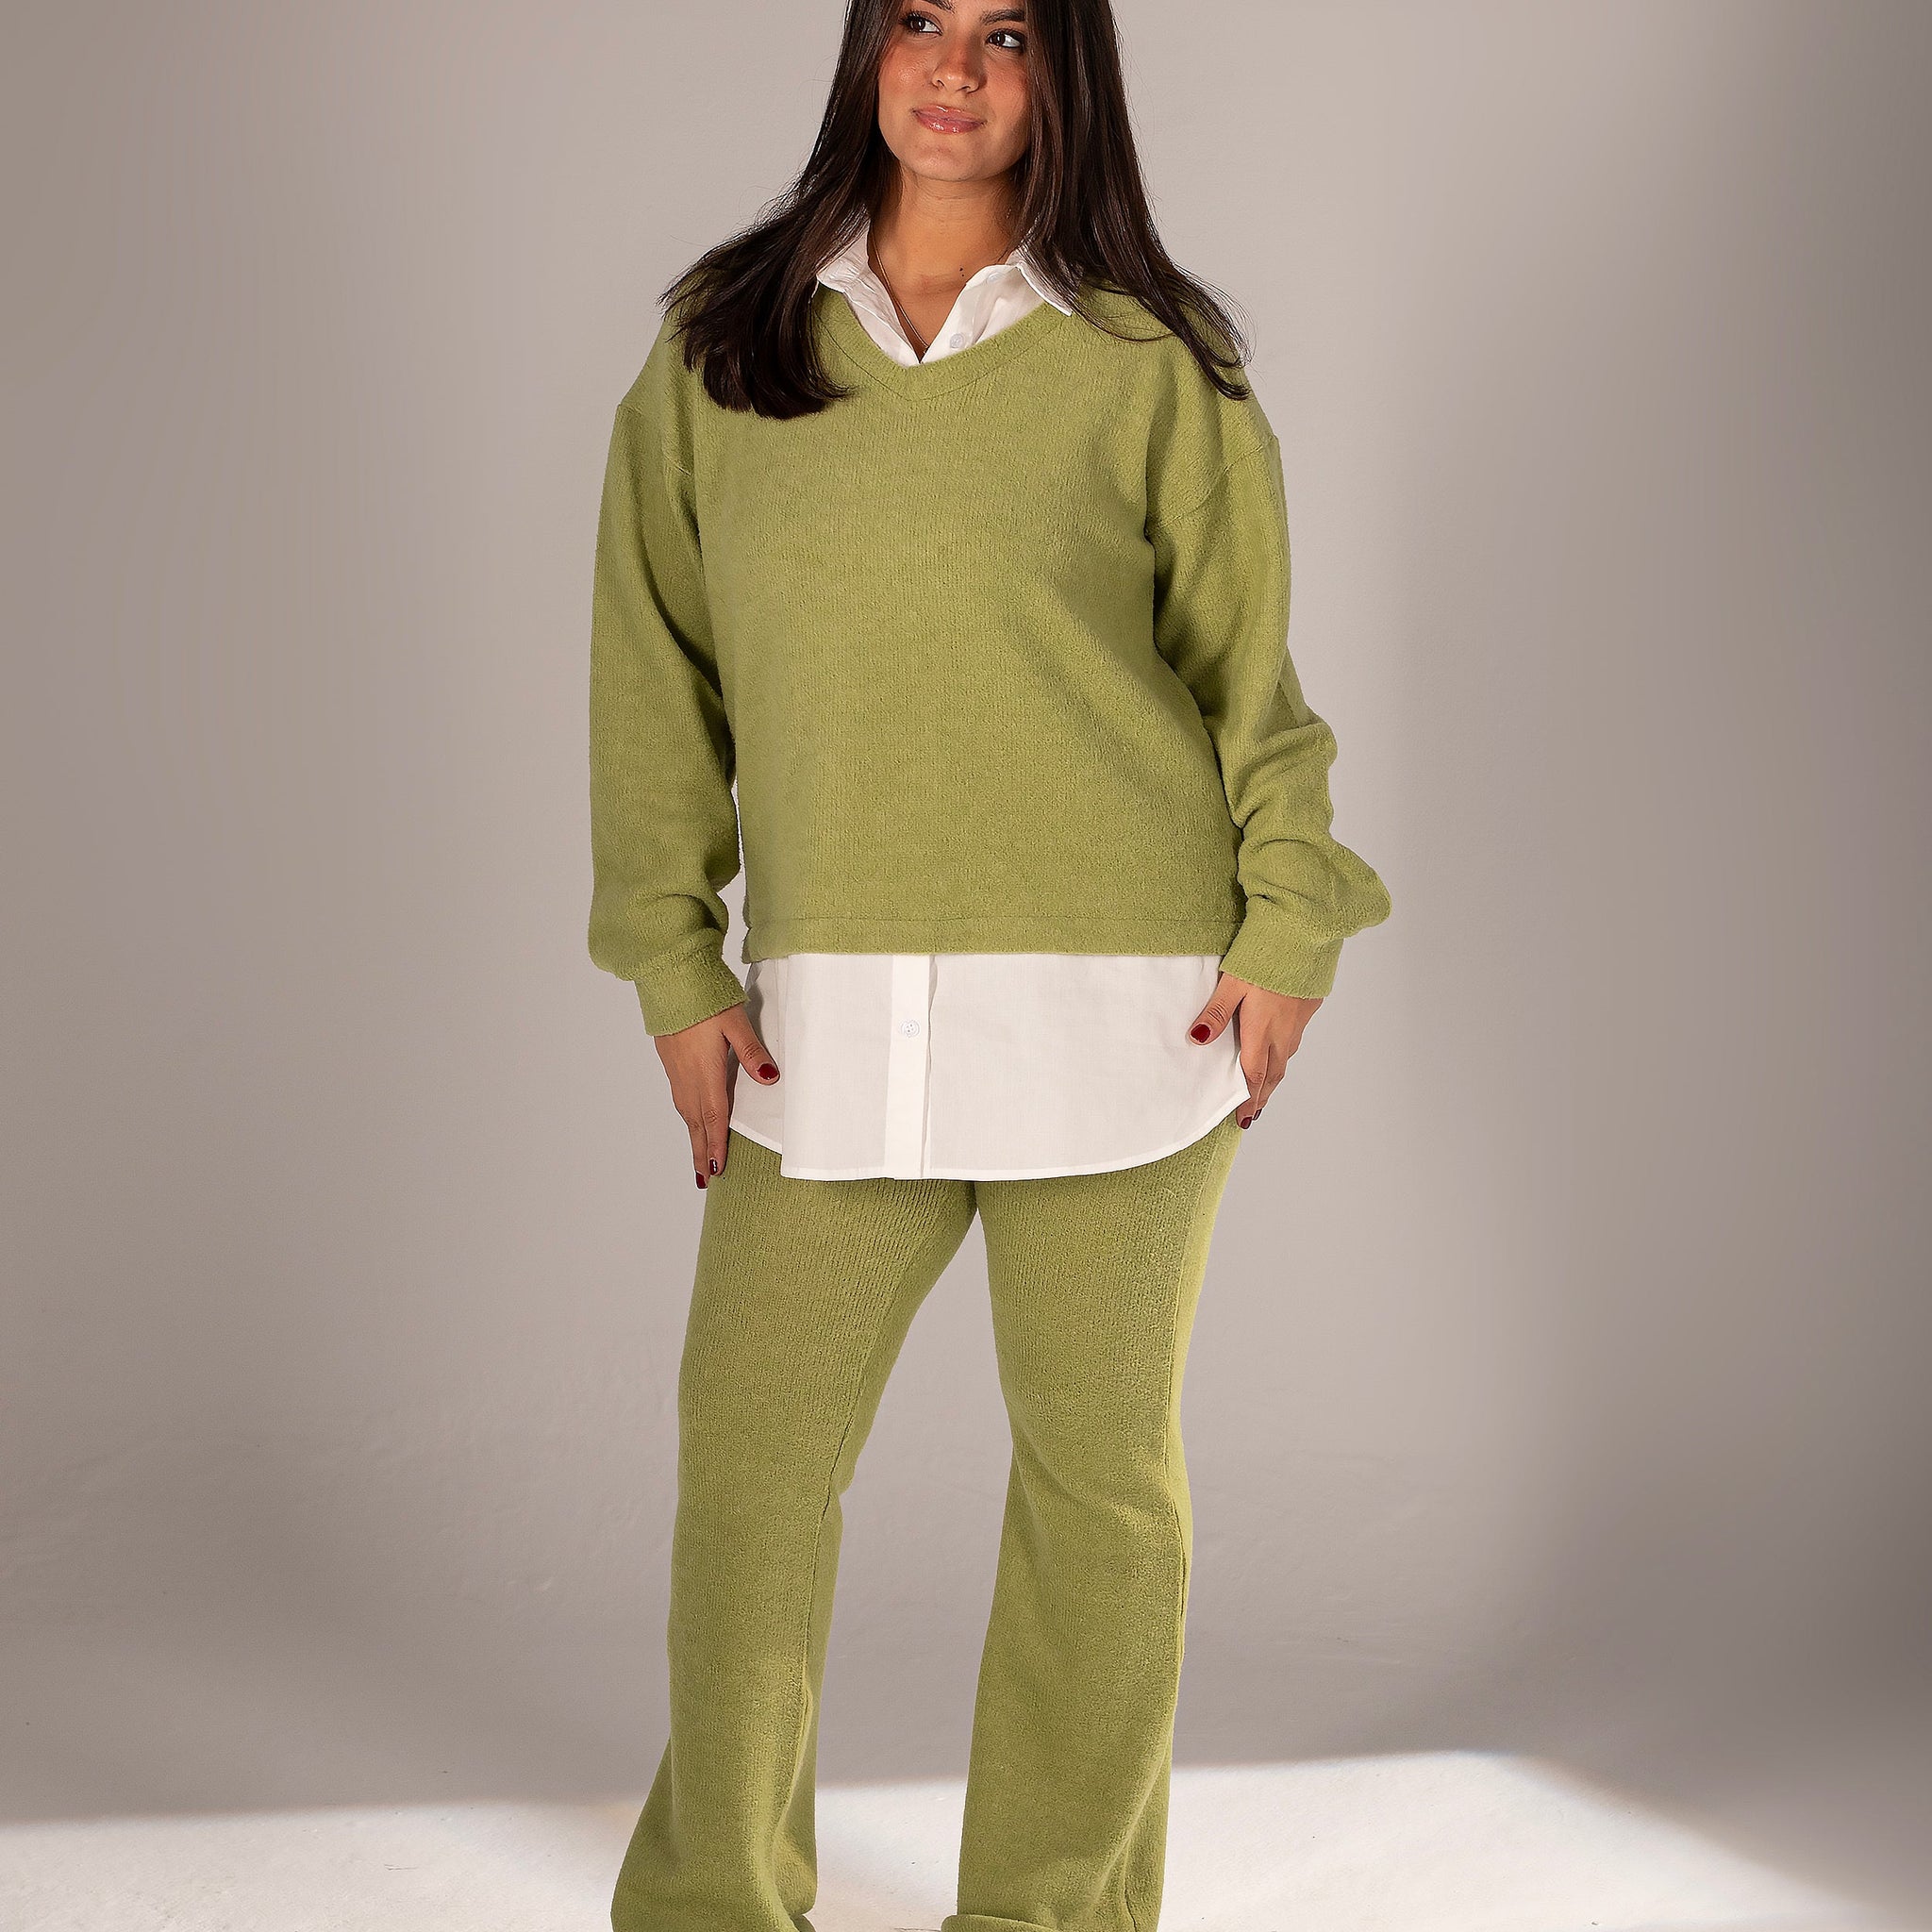 Green Wool Suit With Chemise